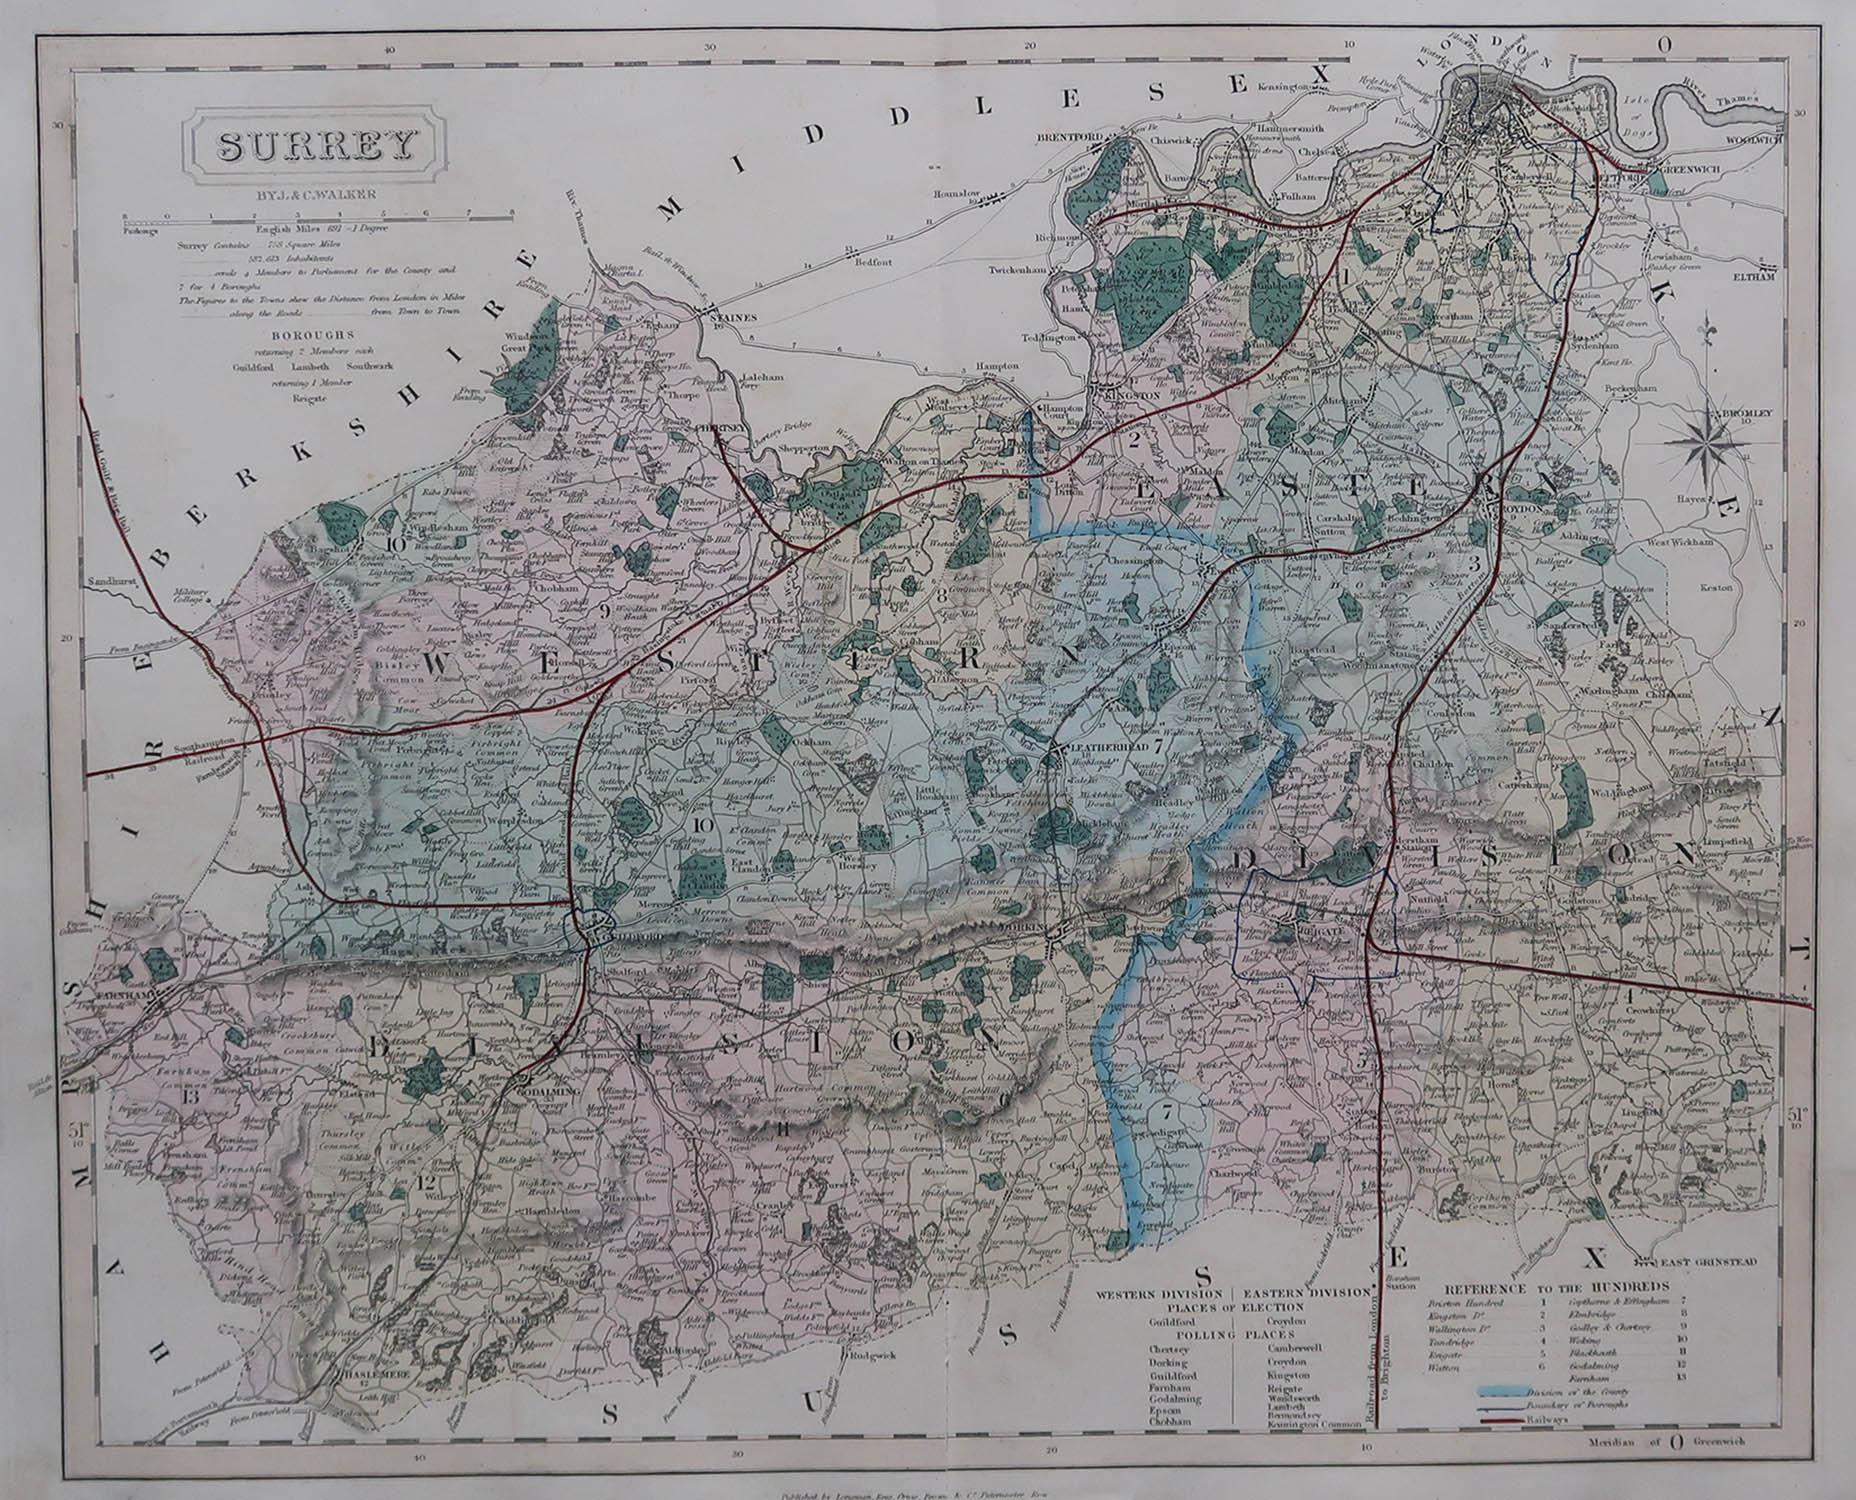 Great map of Surrey

Original colour

By J & C Walker

Published by Longman, Rees, Orme, Brown & Co. 1851

Unframed.




